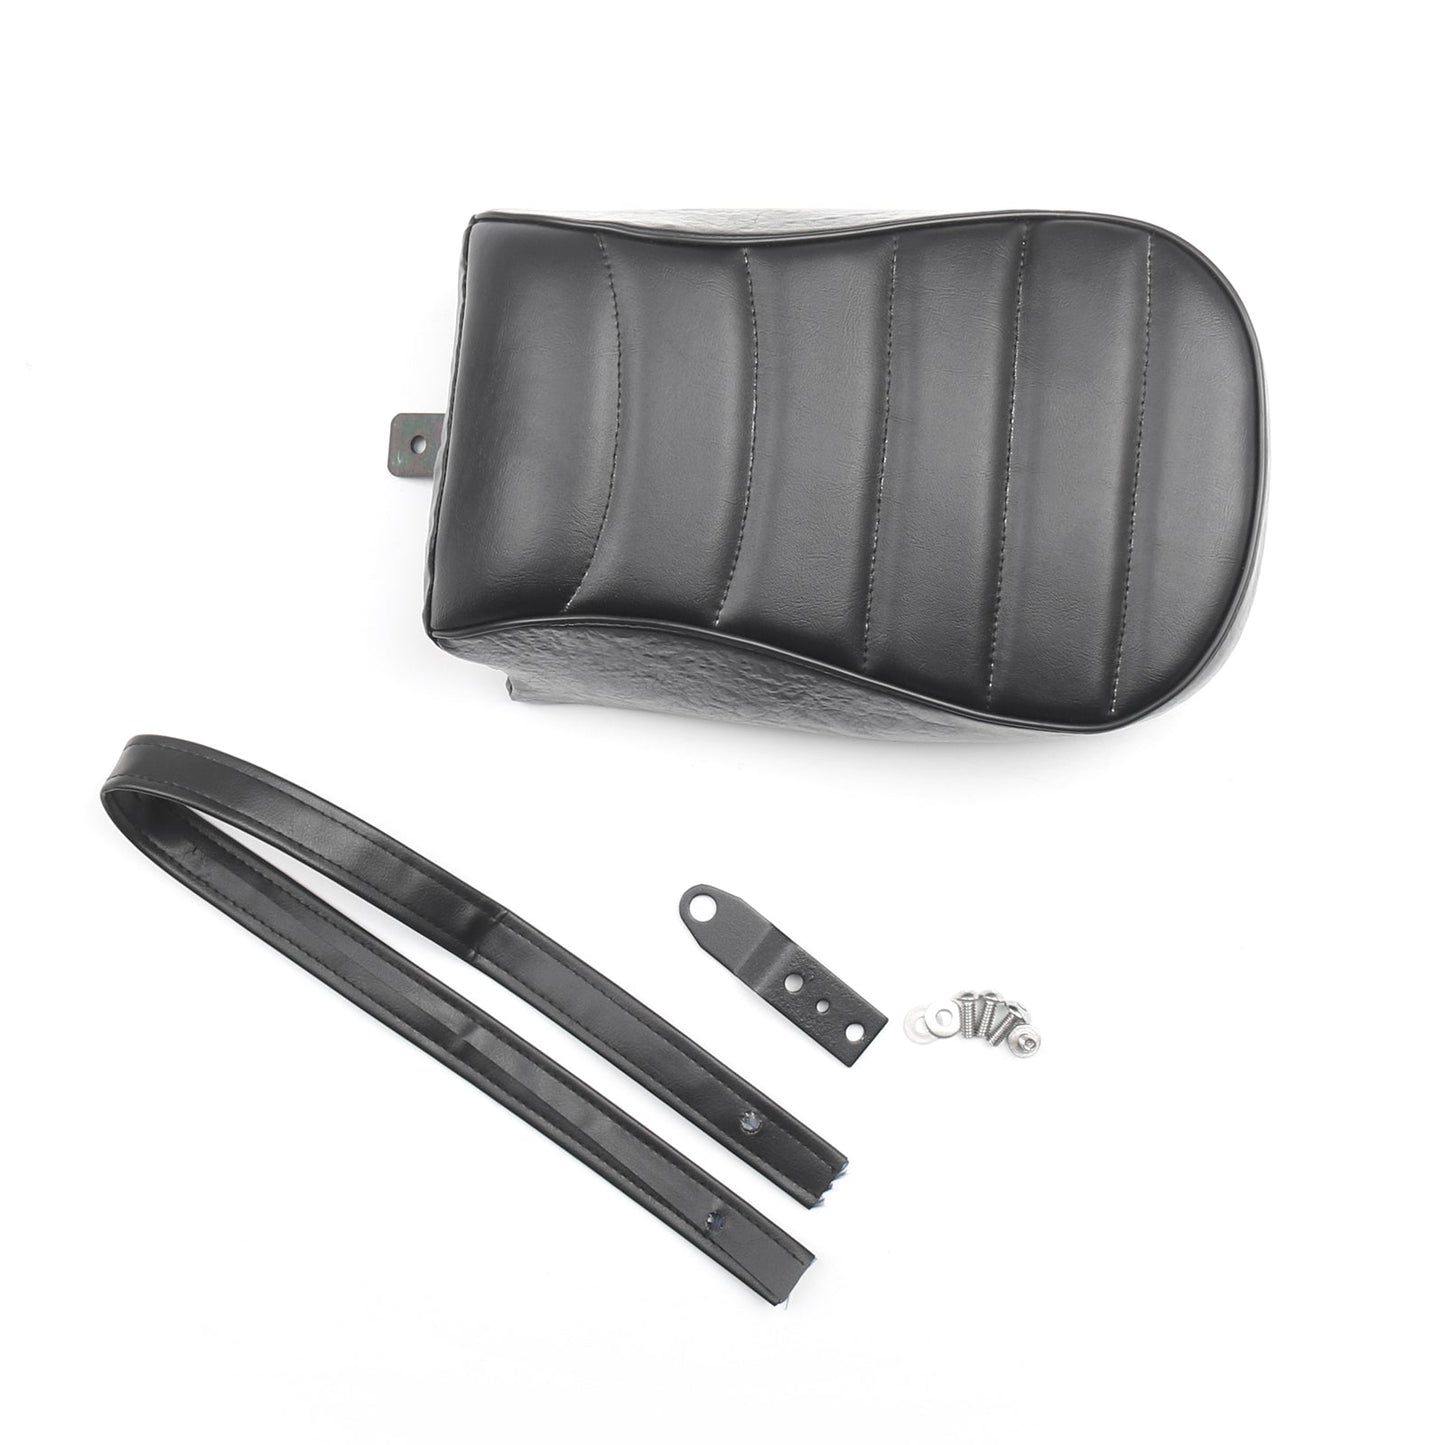 Stripe Leather Rear Passenger Pad Seat For Sportster Iron XL883N 16-18 Generic